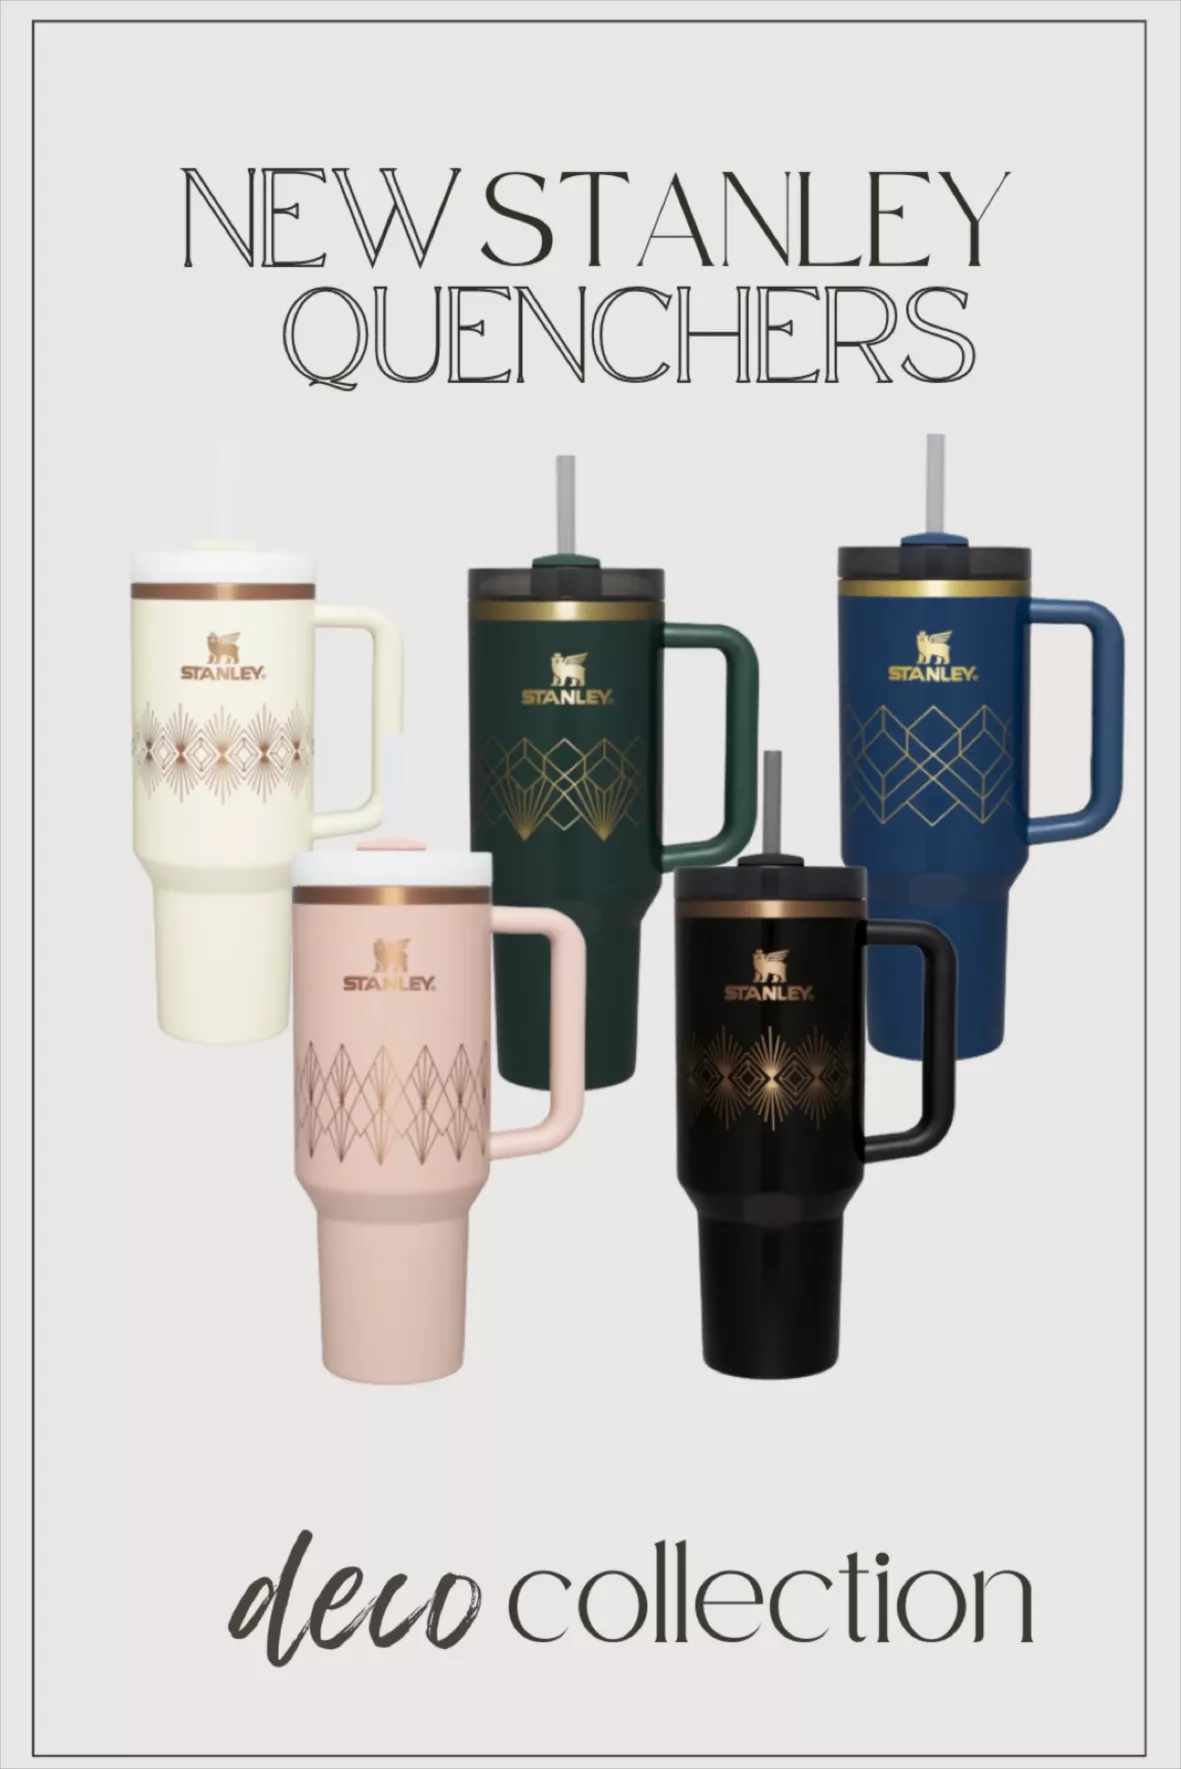 The New Stanley Tumbler Deco Collection Is Dropping This Week and